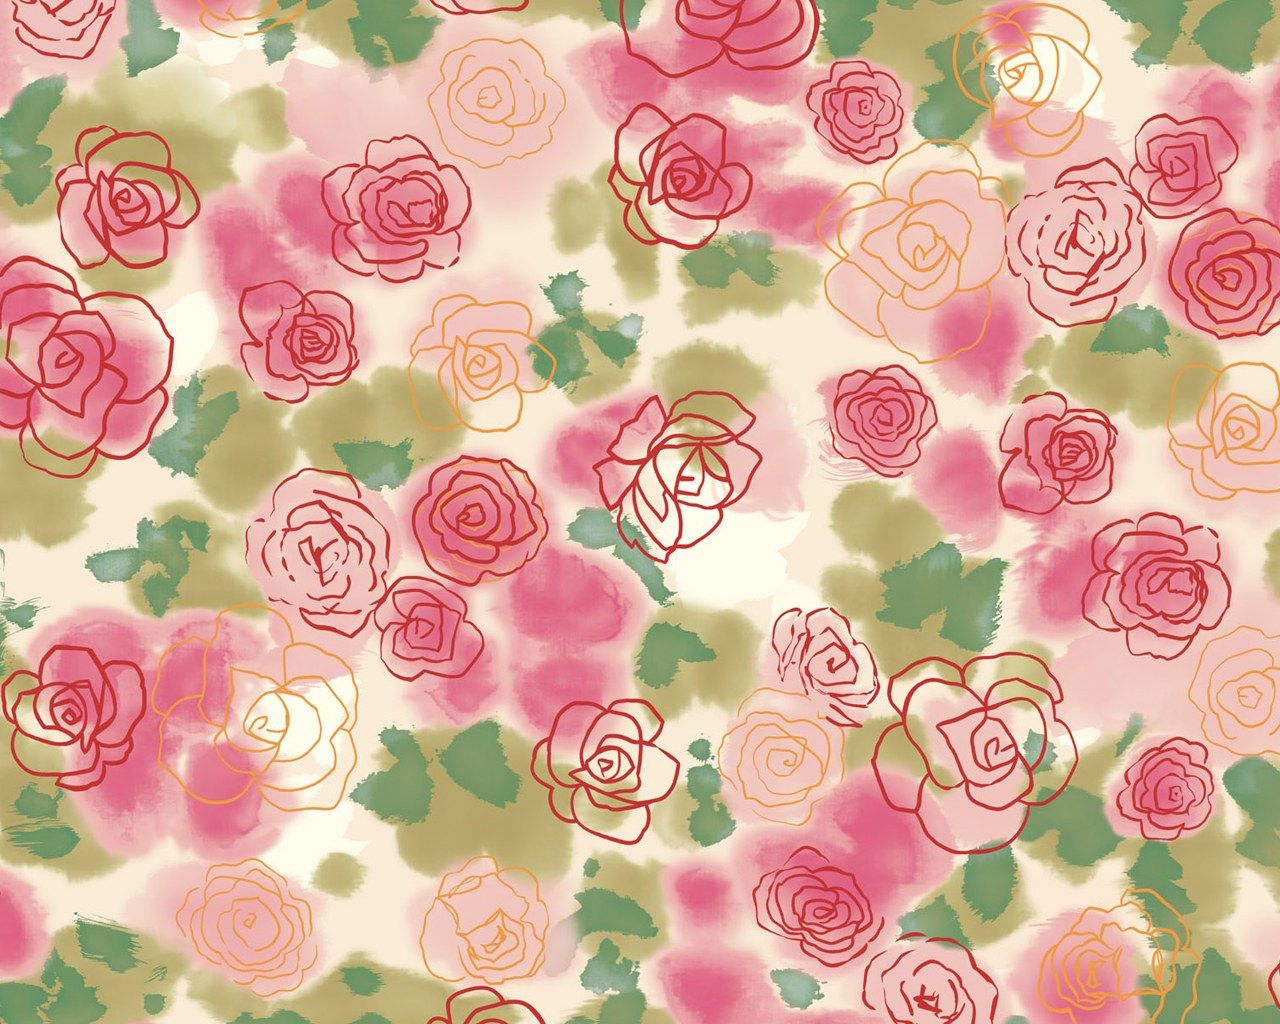 Colors in Japanese Style - Sweet Flower Pattern Design 1280x1024 ...